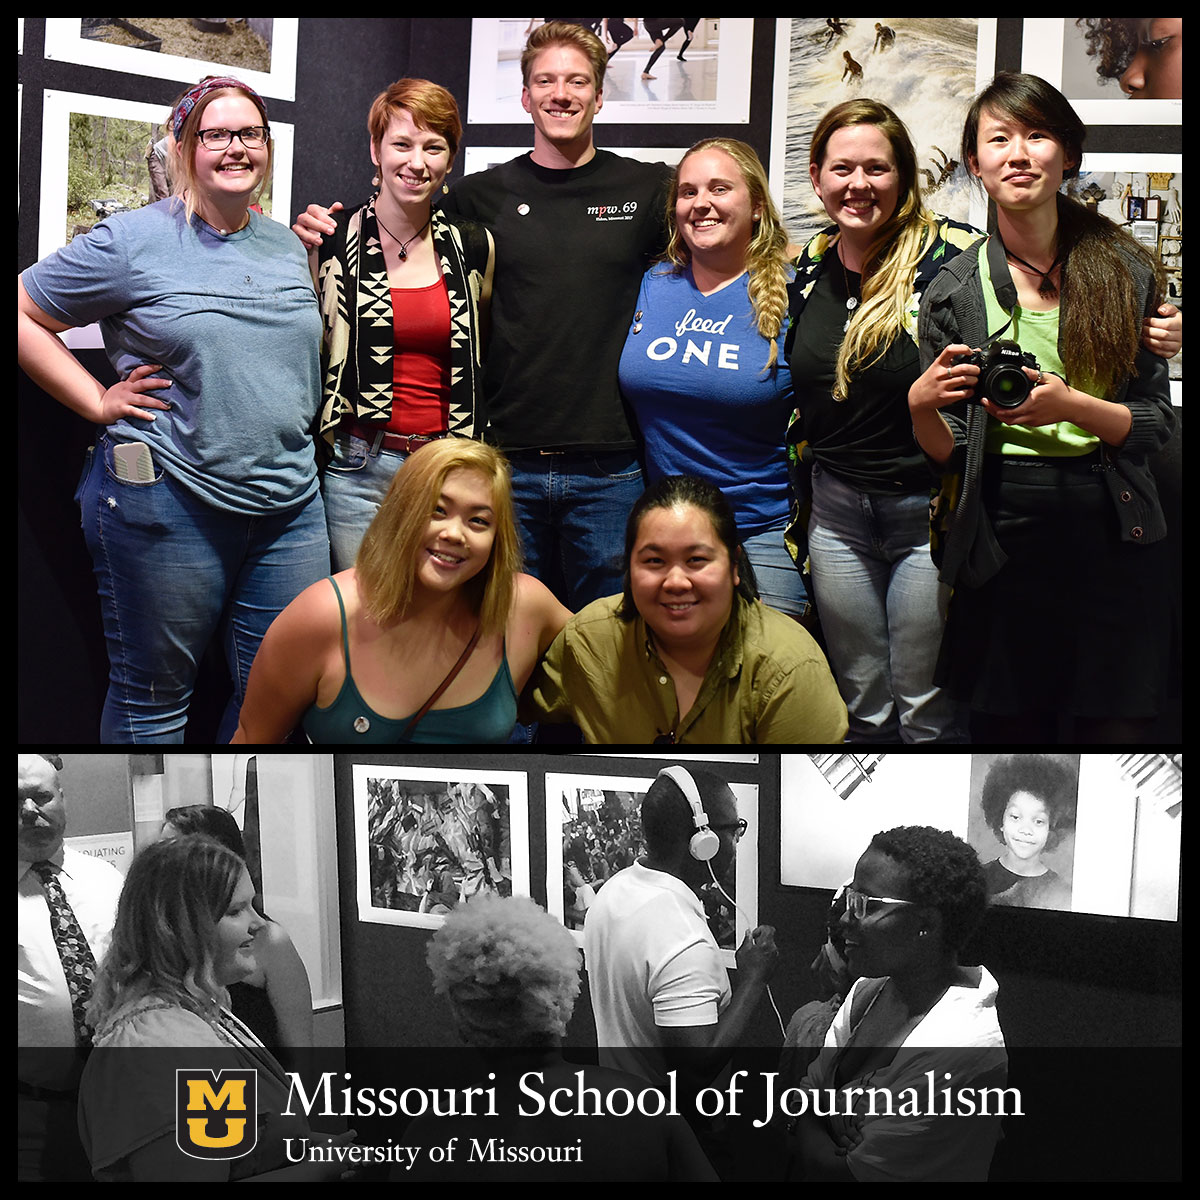 Graduating photojournalism students were responsible for the entire "Parting Shots 7" exhibit, an annual gallery show which recognizes some of the best work by Missouri students. Planning and mounting the exhibit included editing, toning and printing the selected images.